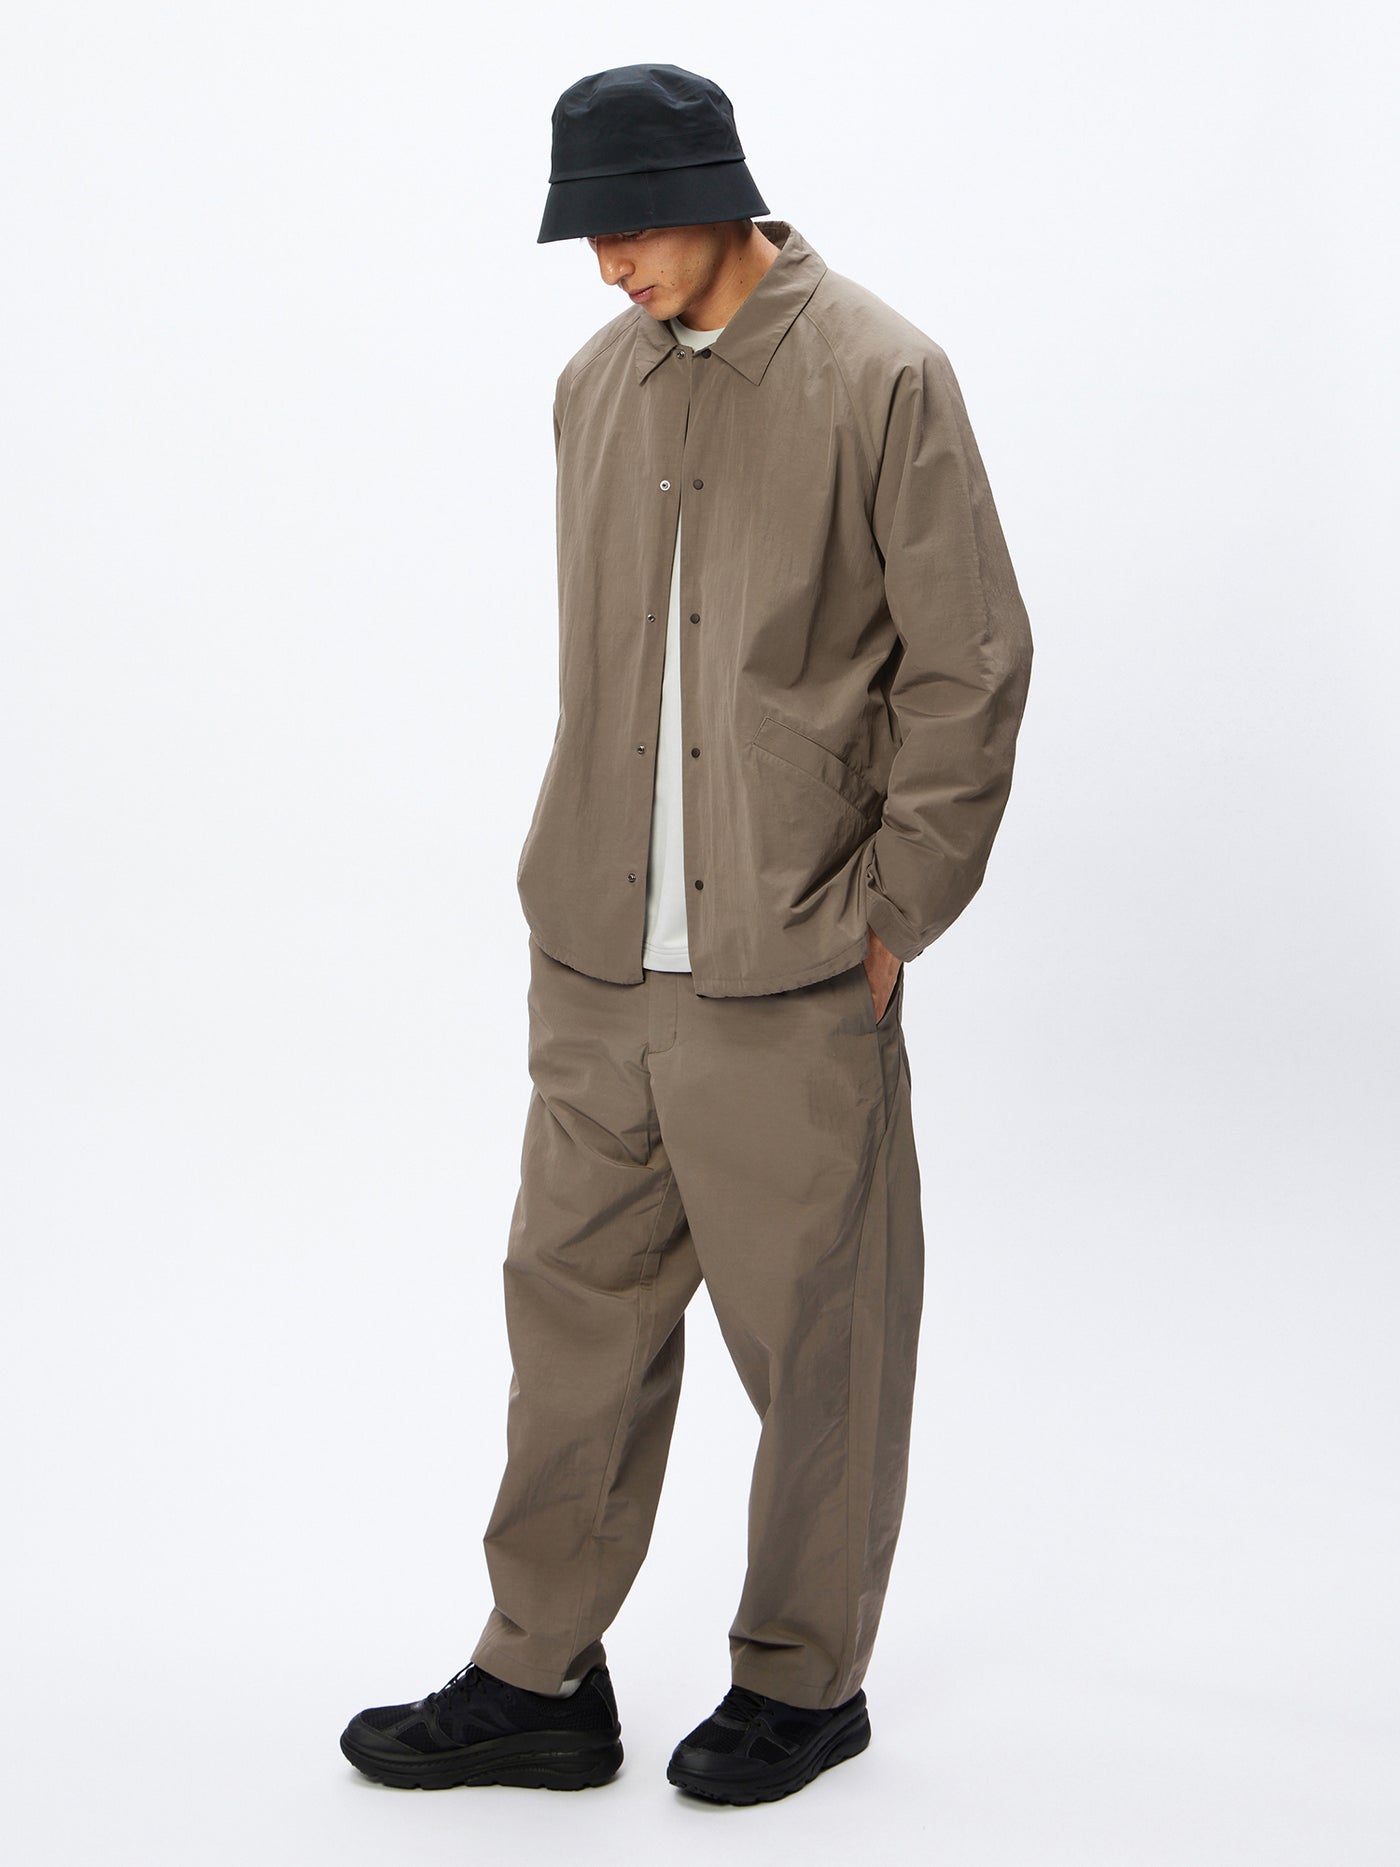 Model: Height 6'0" | Wearing: TAUPE GRAY / 3